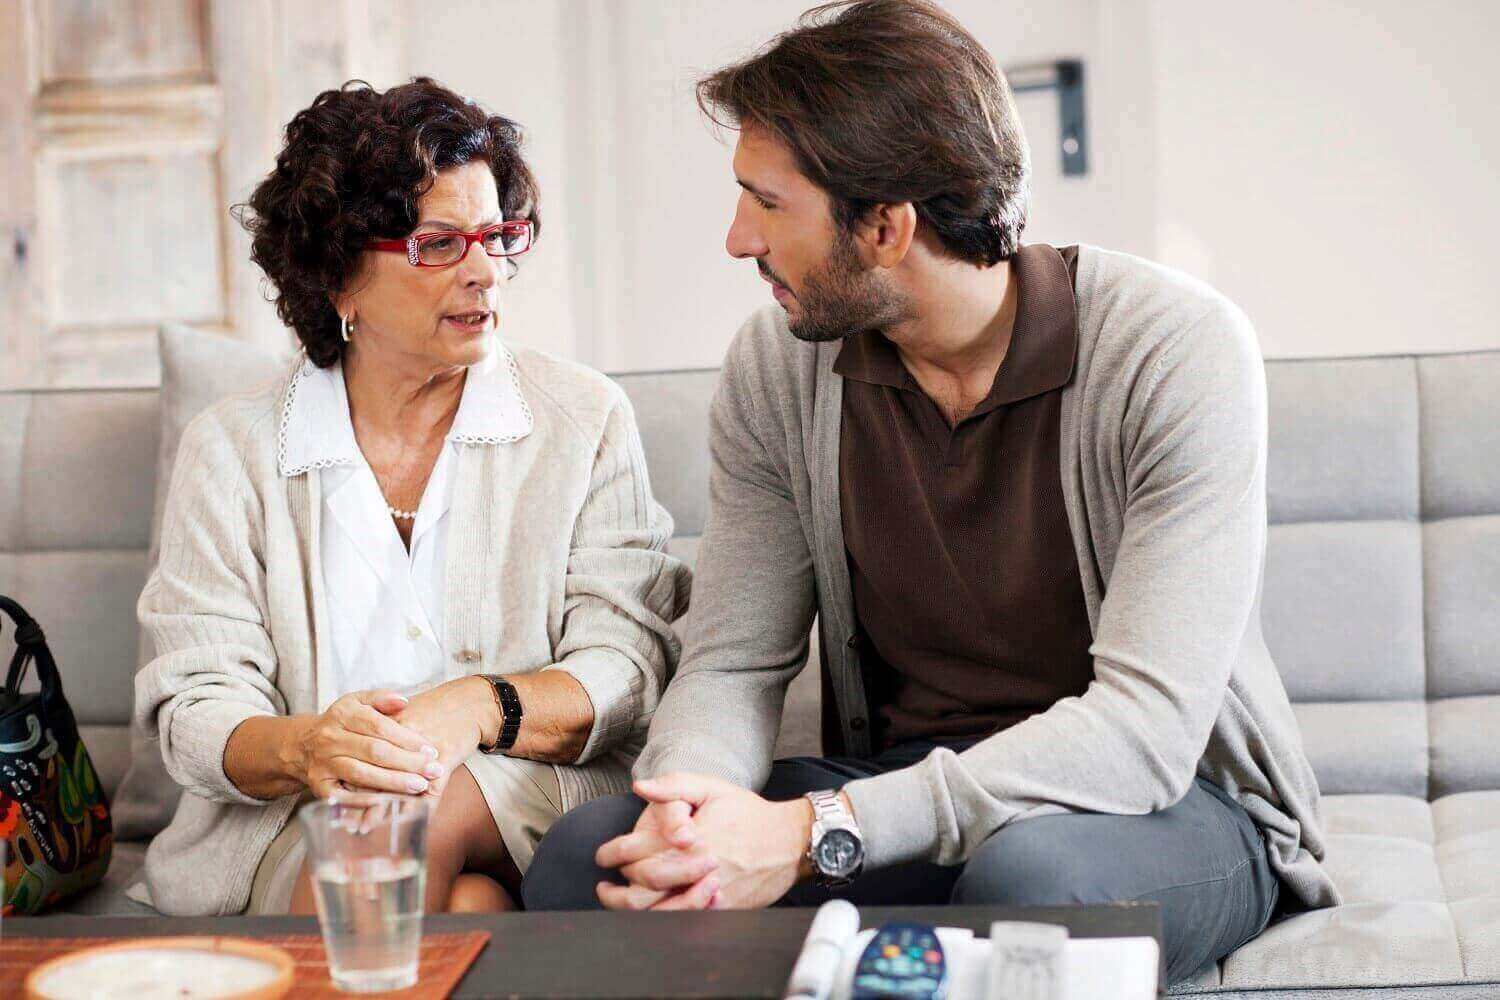 5 Steps to Convince Your Parent to Seek Addiction Treatment